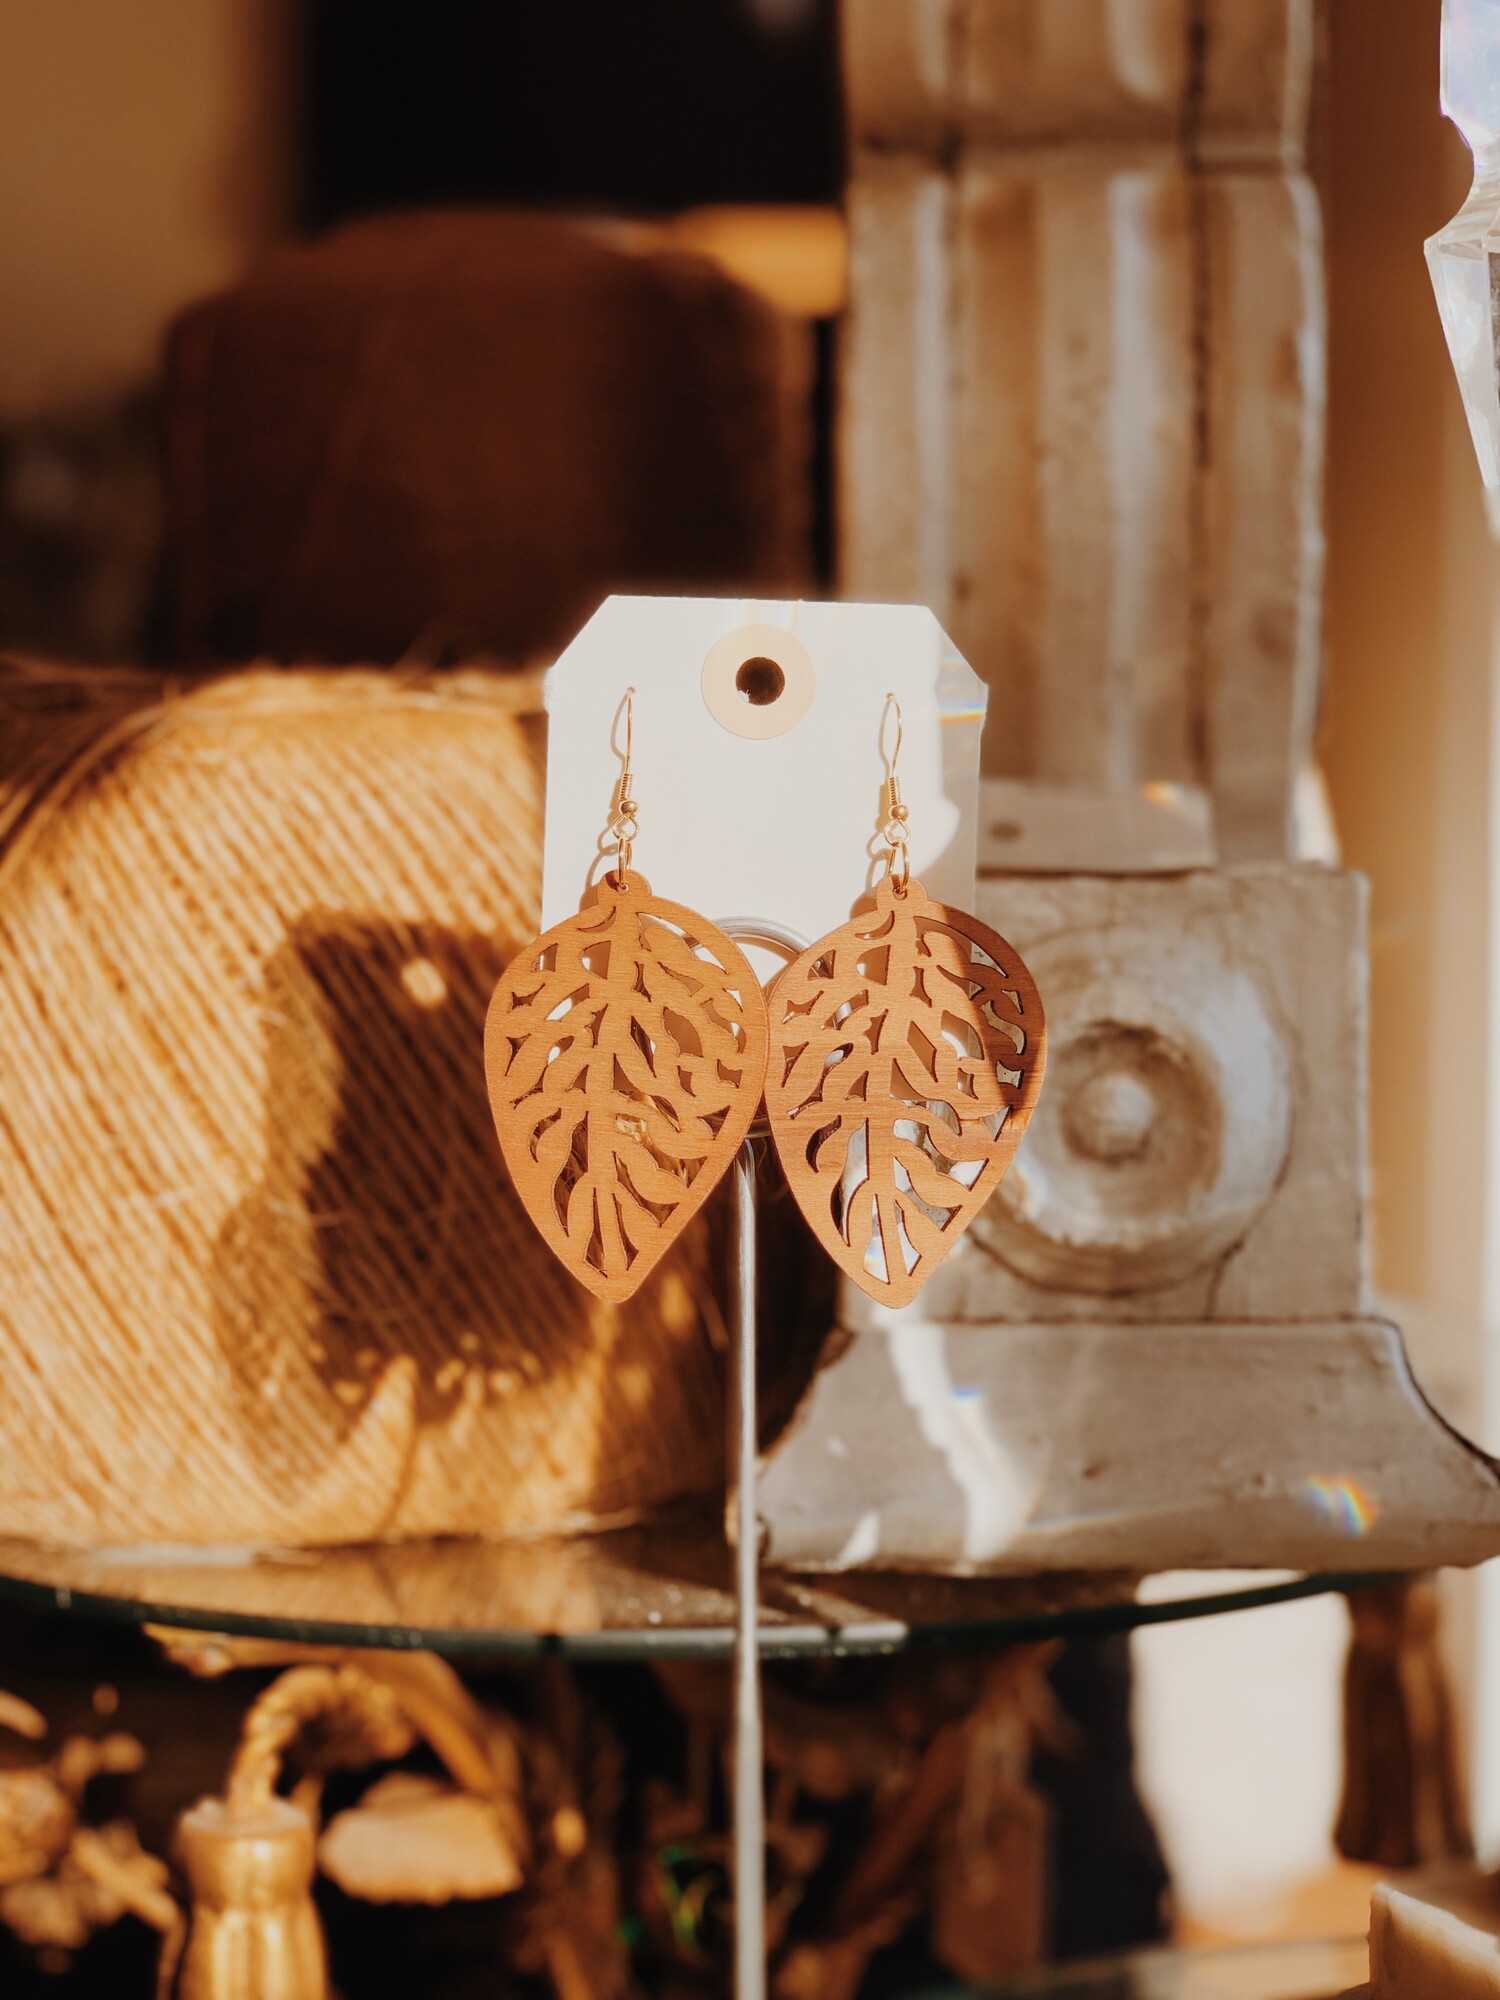 These gorgeous wooden carved earrings measure 3.5 inches long!